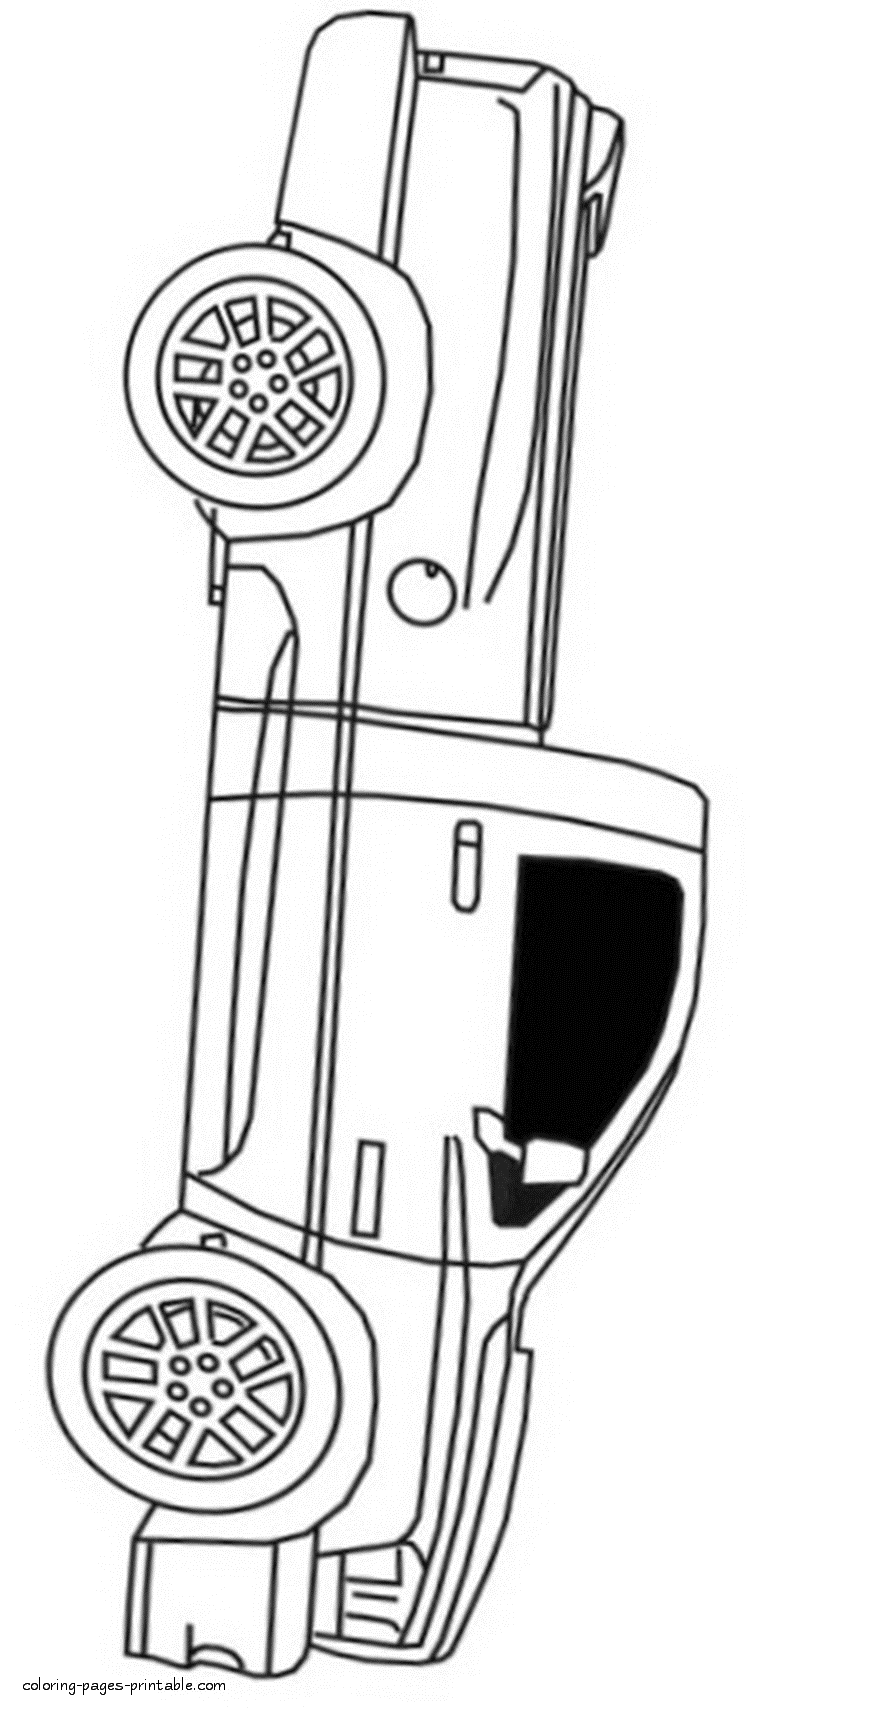 Truck coloring pages for boys. Pickup